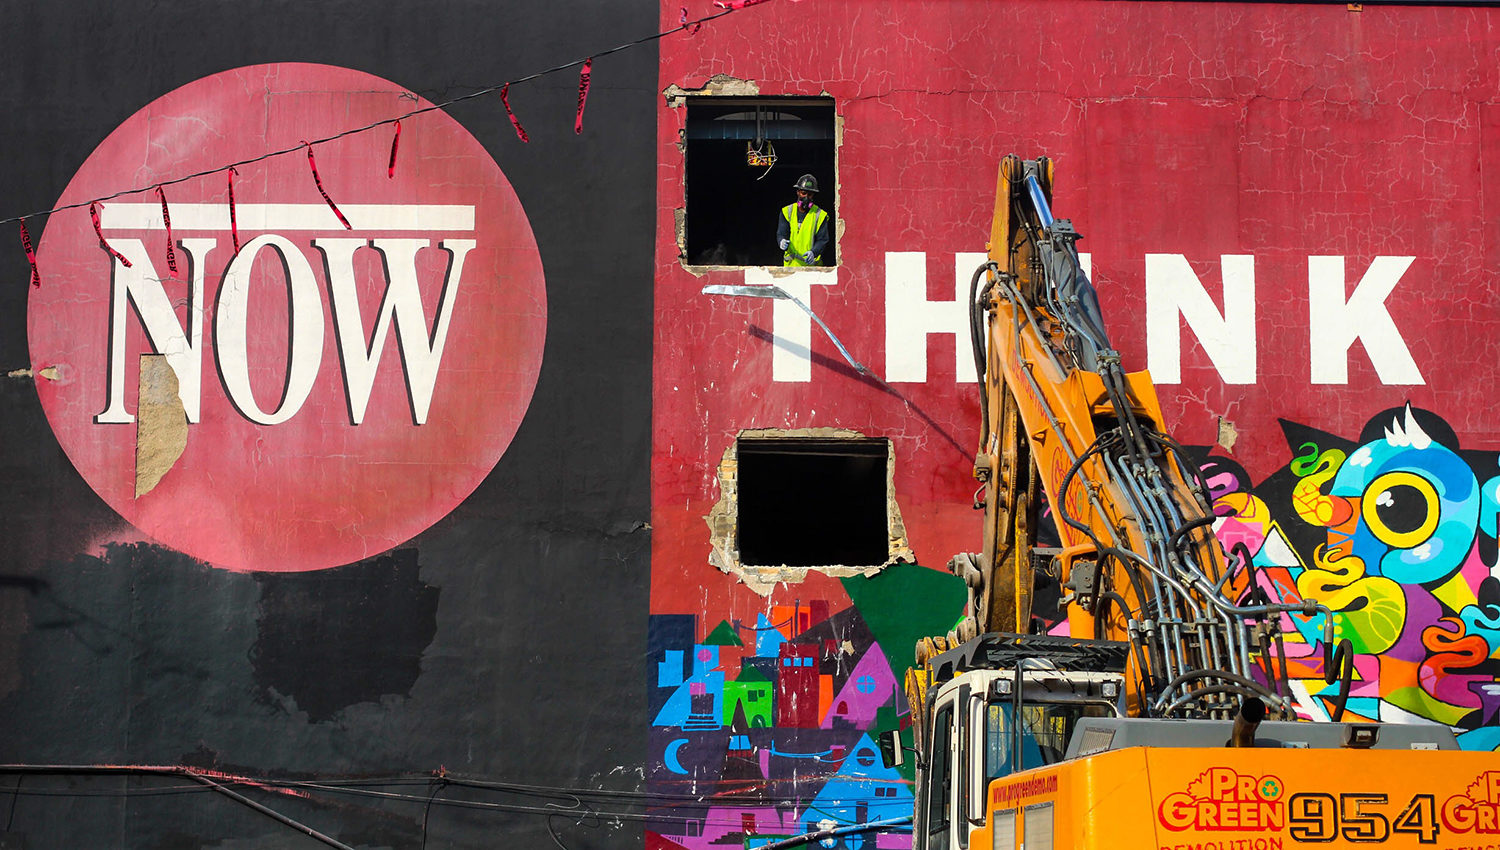 The Now red logo is presented on a black background on one half of the building. On the other side is the painted white word Think on a red background. A construction worker stands in an empty window frame. An excavator is positioned in front of the word Think.